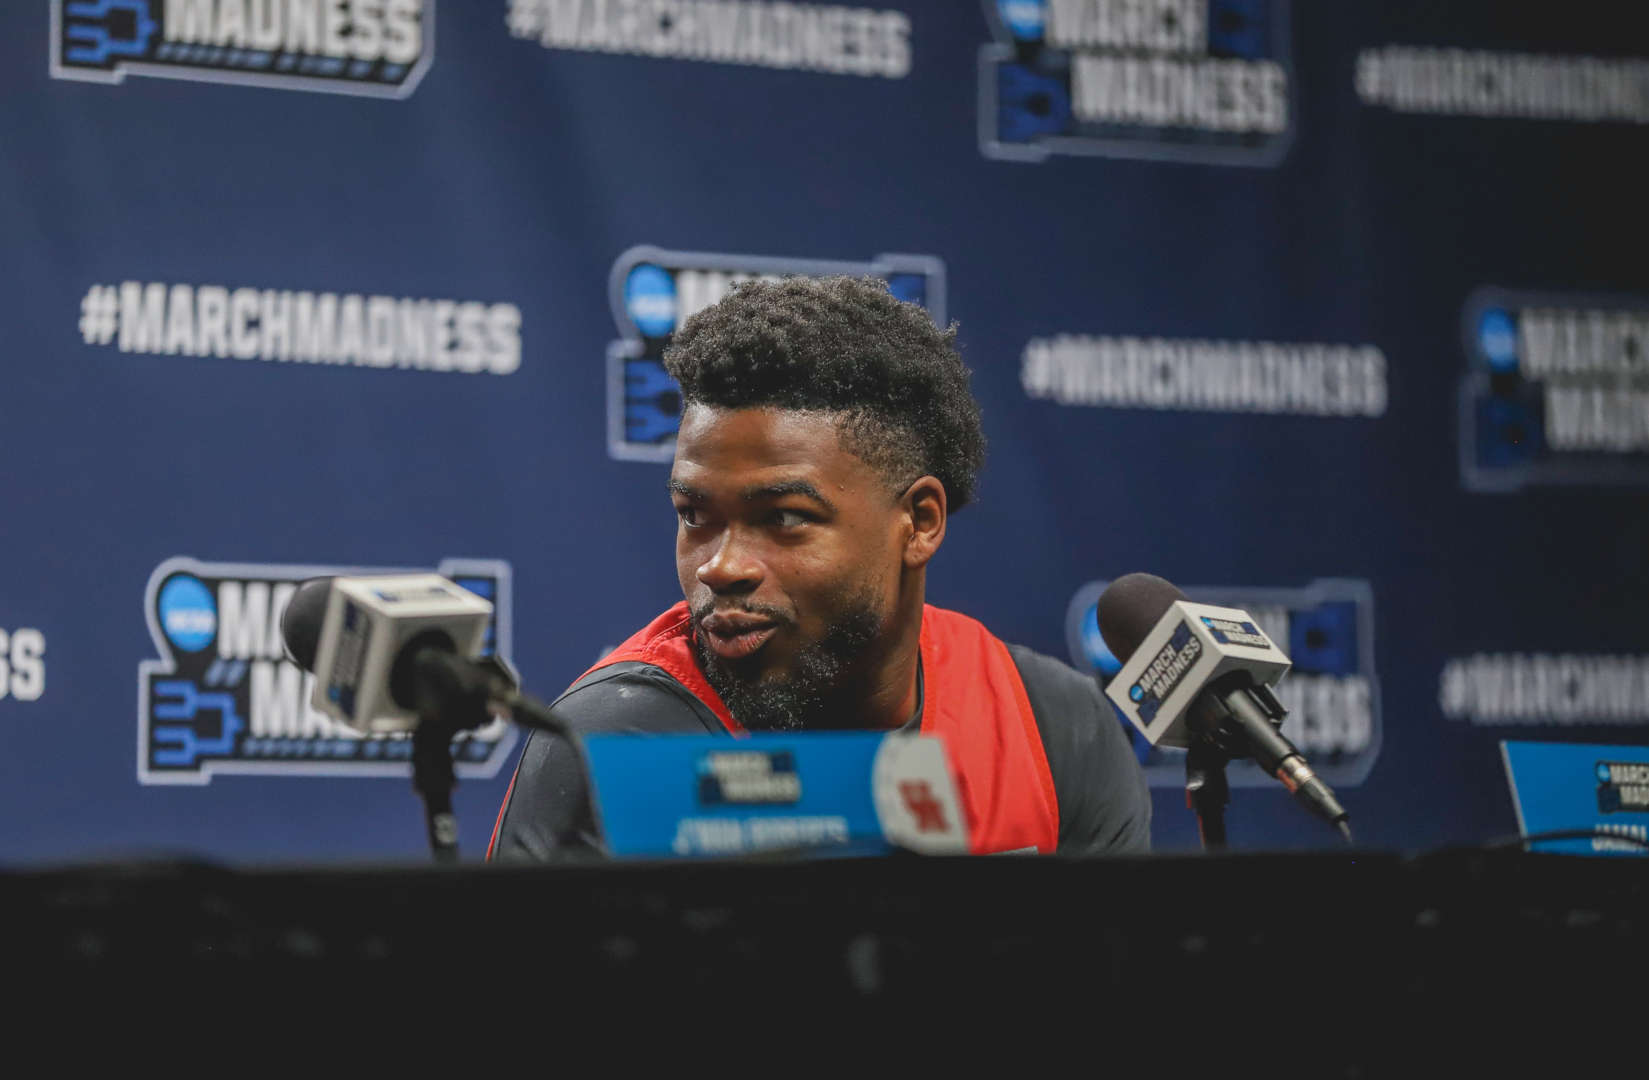 UH point guard Jamal Shead met with the media on Wednesday prior to the Cougars' NCAA Tournament opener against Northern Kentucky on Thursday night. | Anh Le/The Cougar